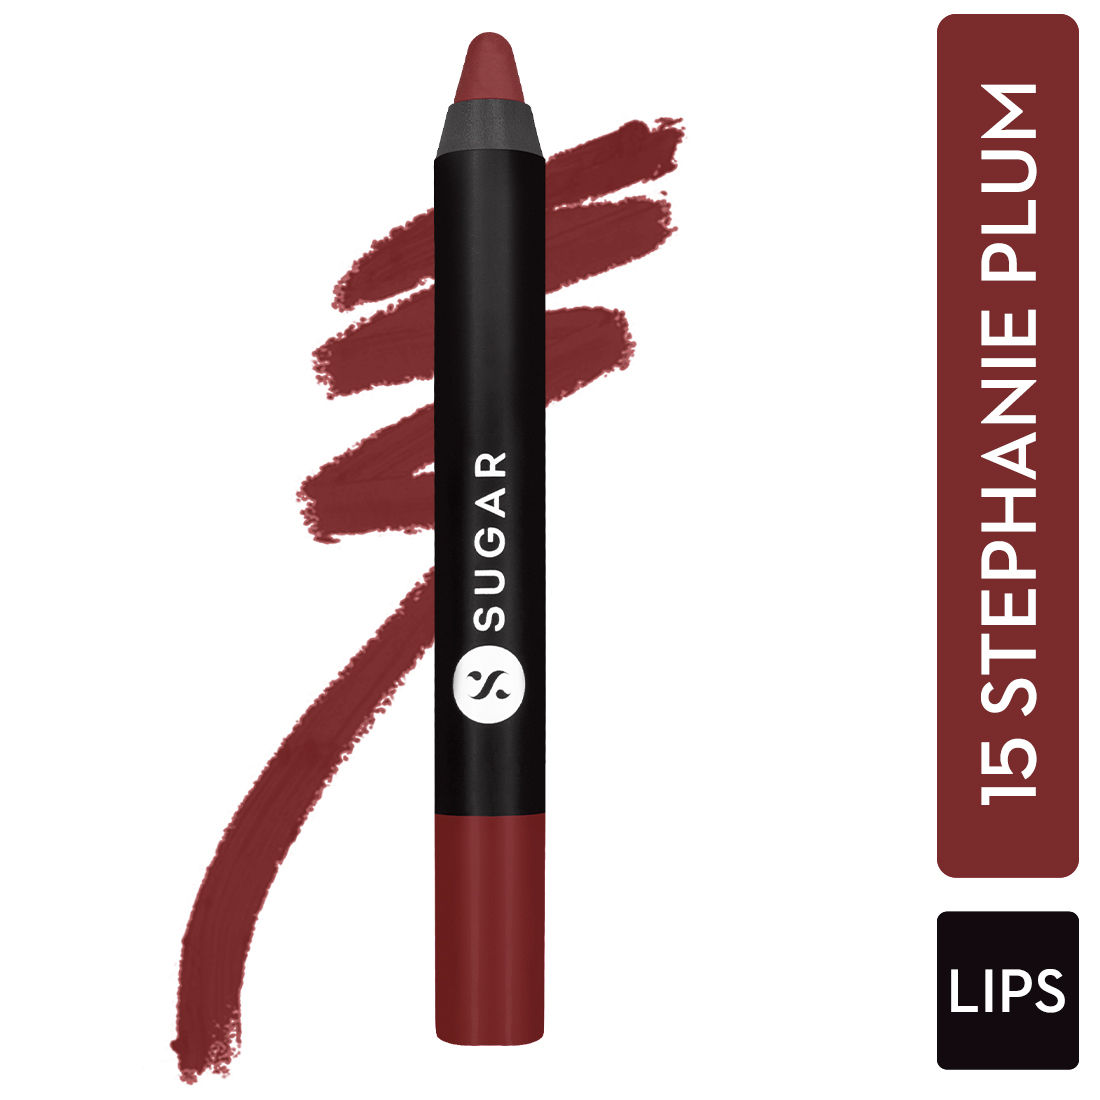 Buy SUGAR Cosmetics - Matte As Hell - Crayon Lipstick -15 Stephanie Plum (Plum Mauve) - 2.8 gms - Bold and Silky Matte Finish Lipstick, Lightweight, Lasts Up to 12 hours - Purplle